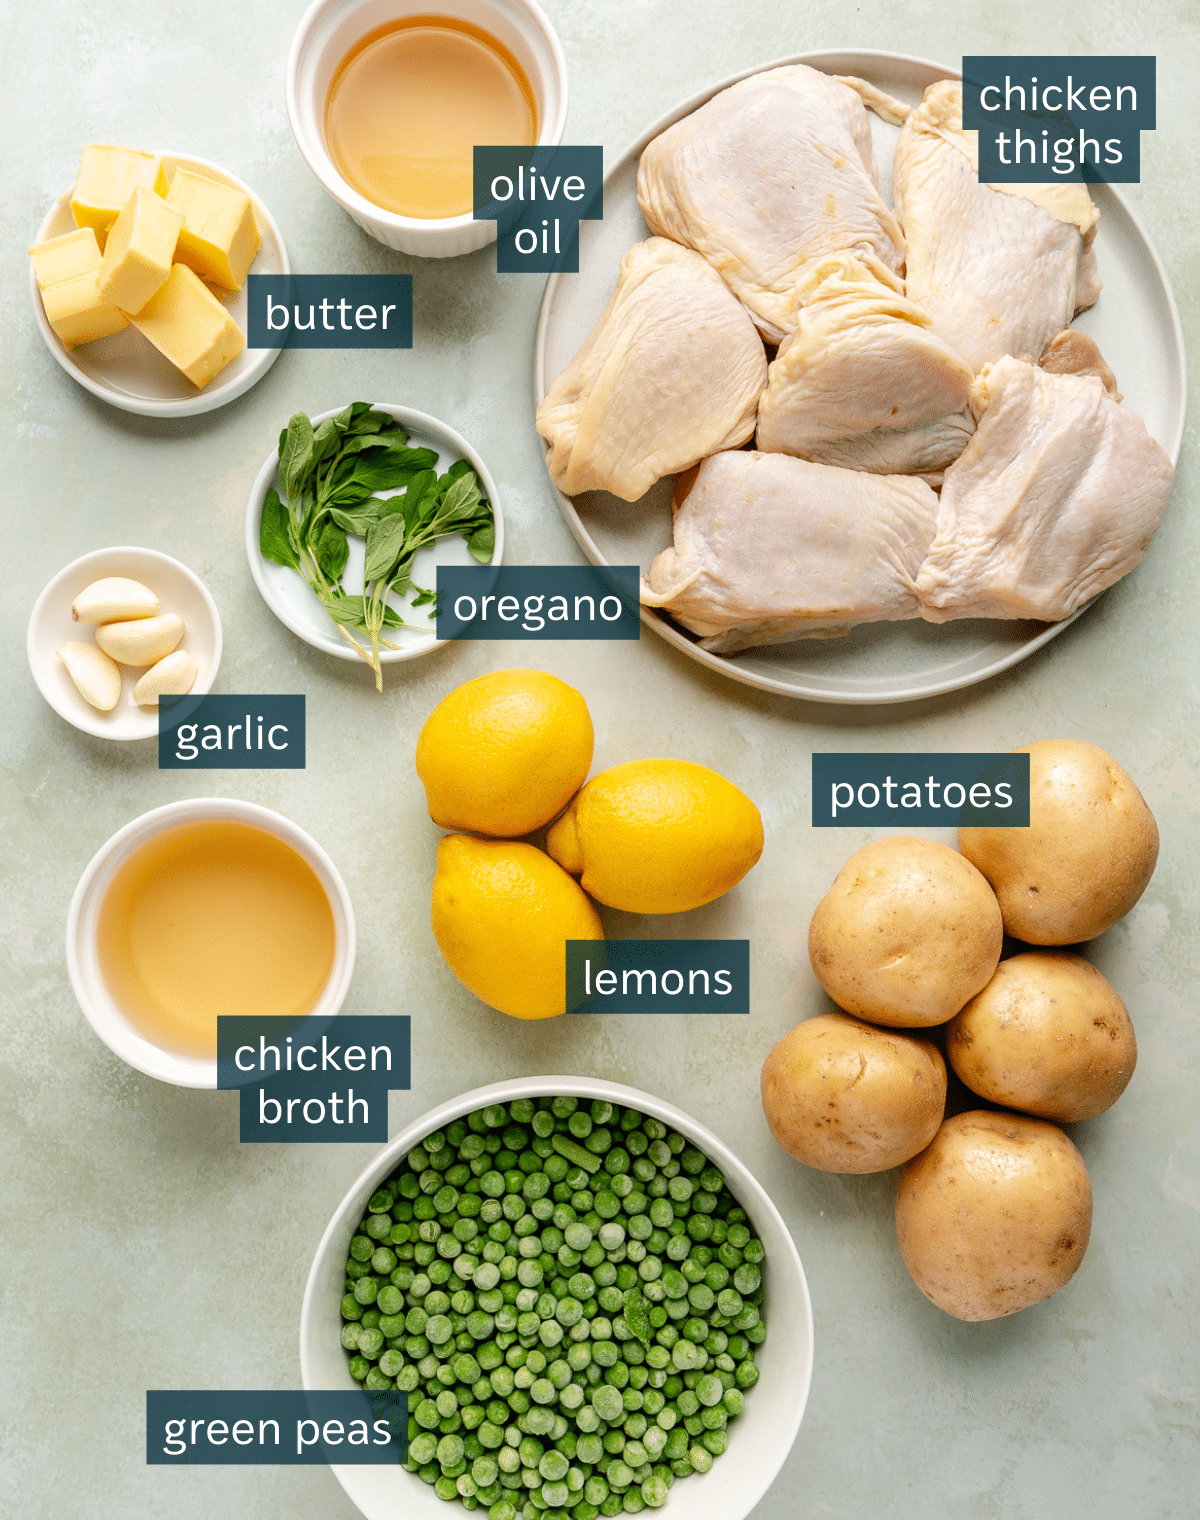 Ingredients for chicken vesuvio sit in a variety of bowls on a light green surface.